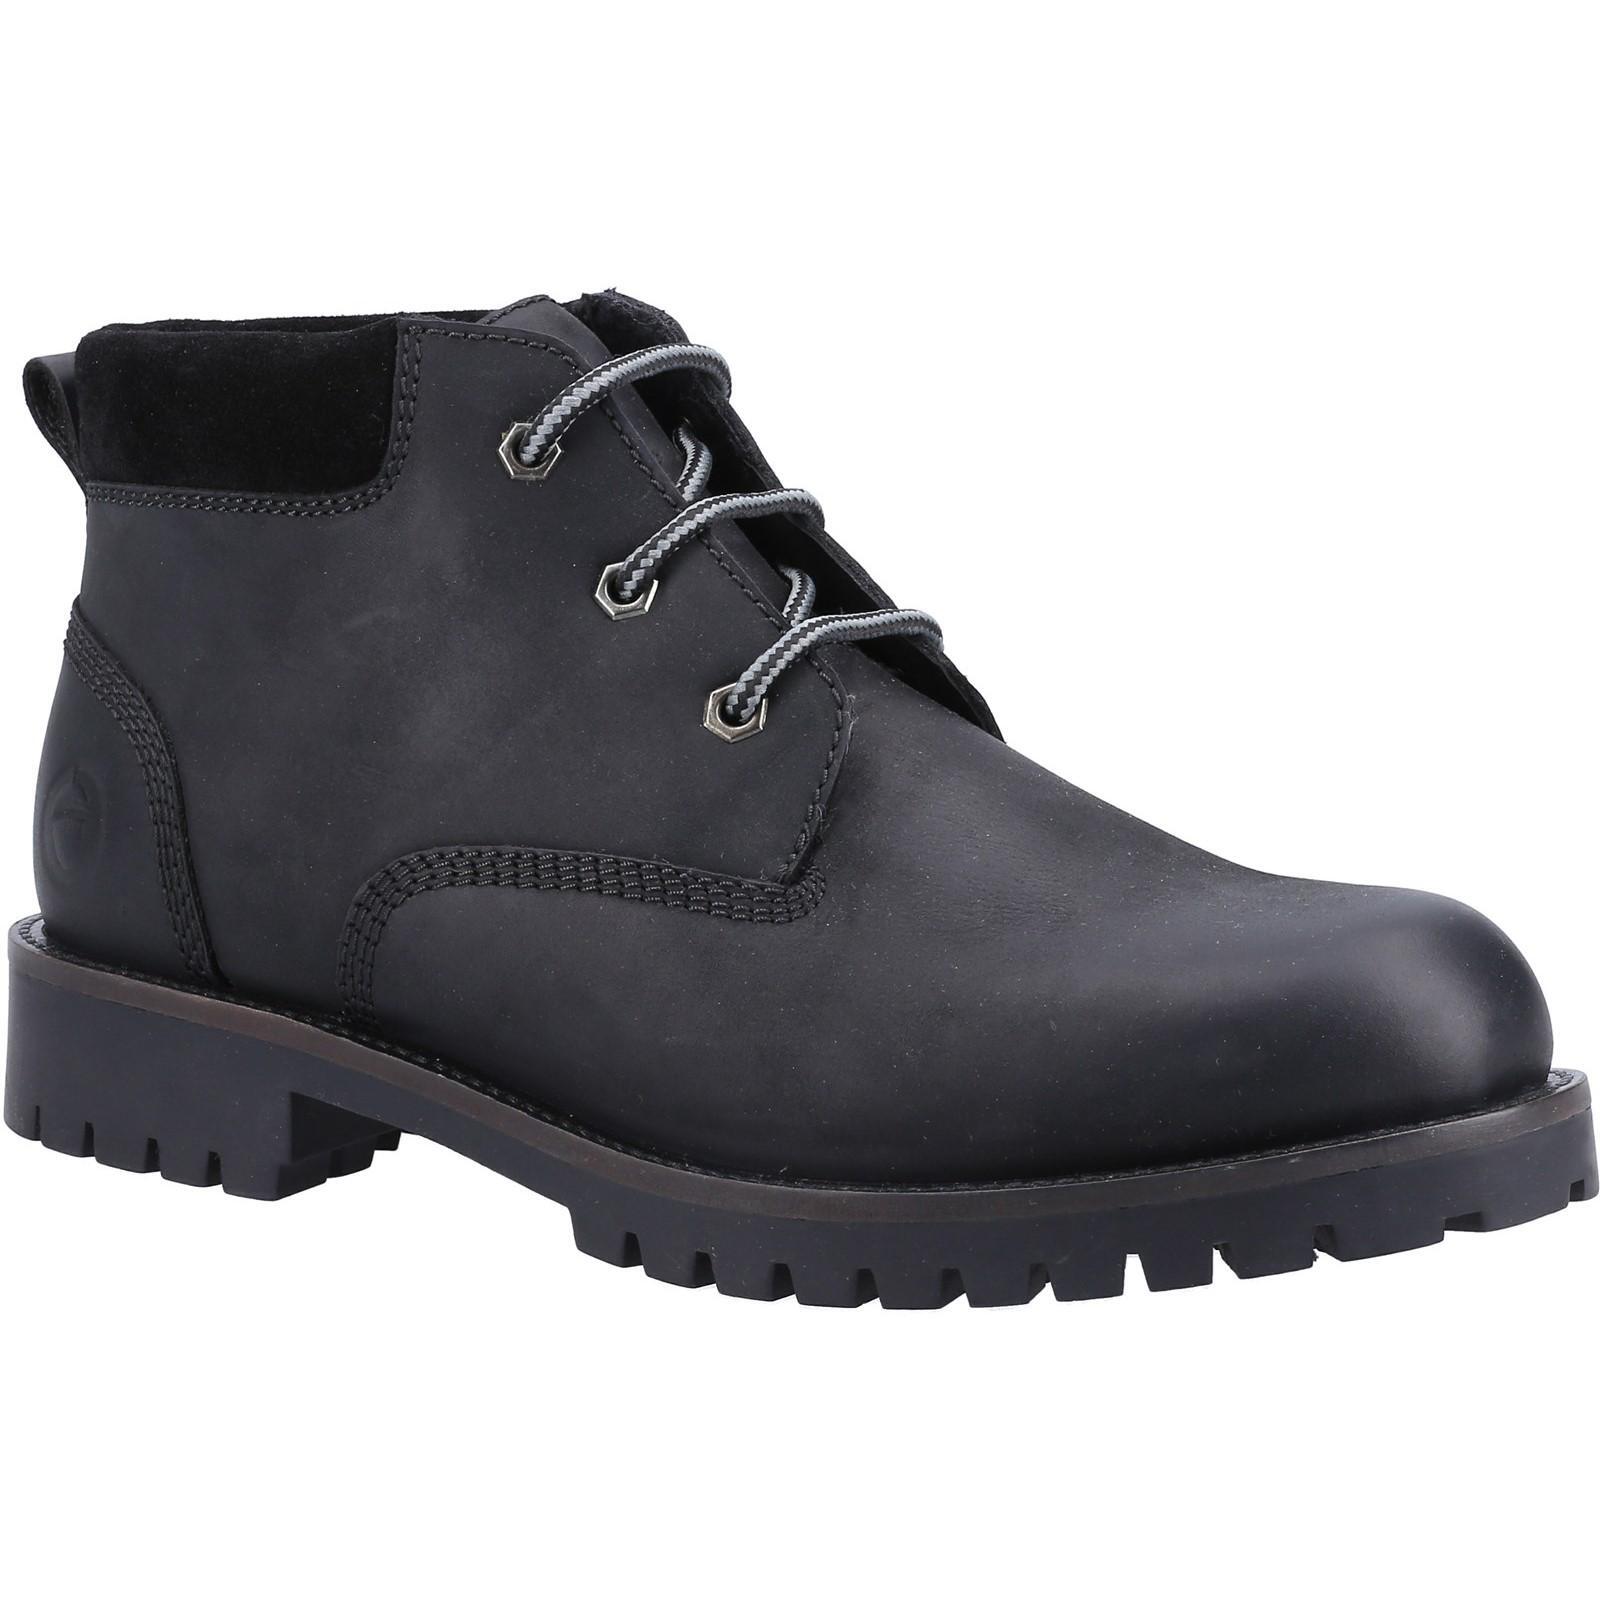 COTSWOLD Mens Banbury Leather Ankle Boots (Black)